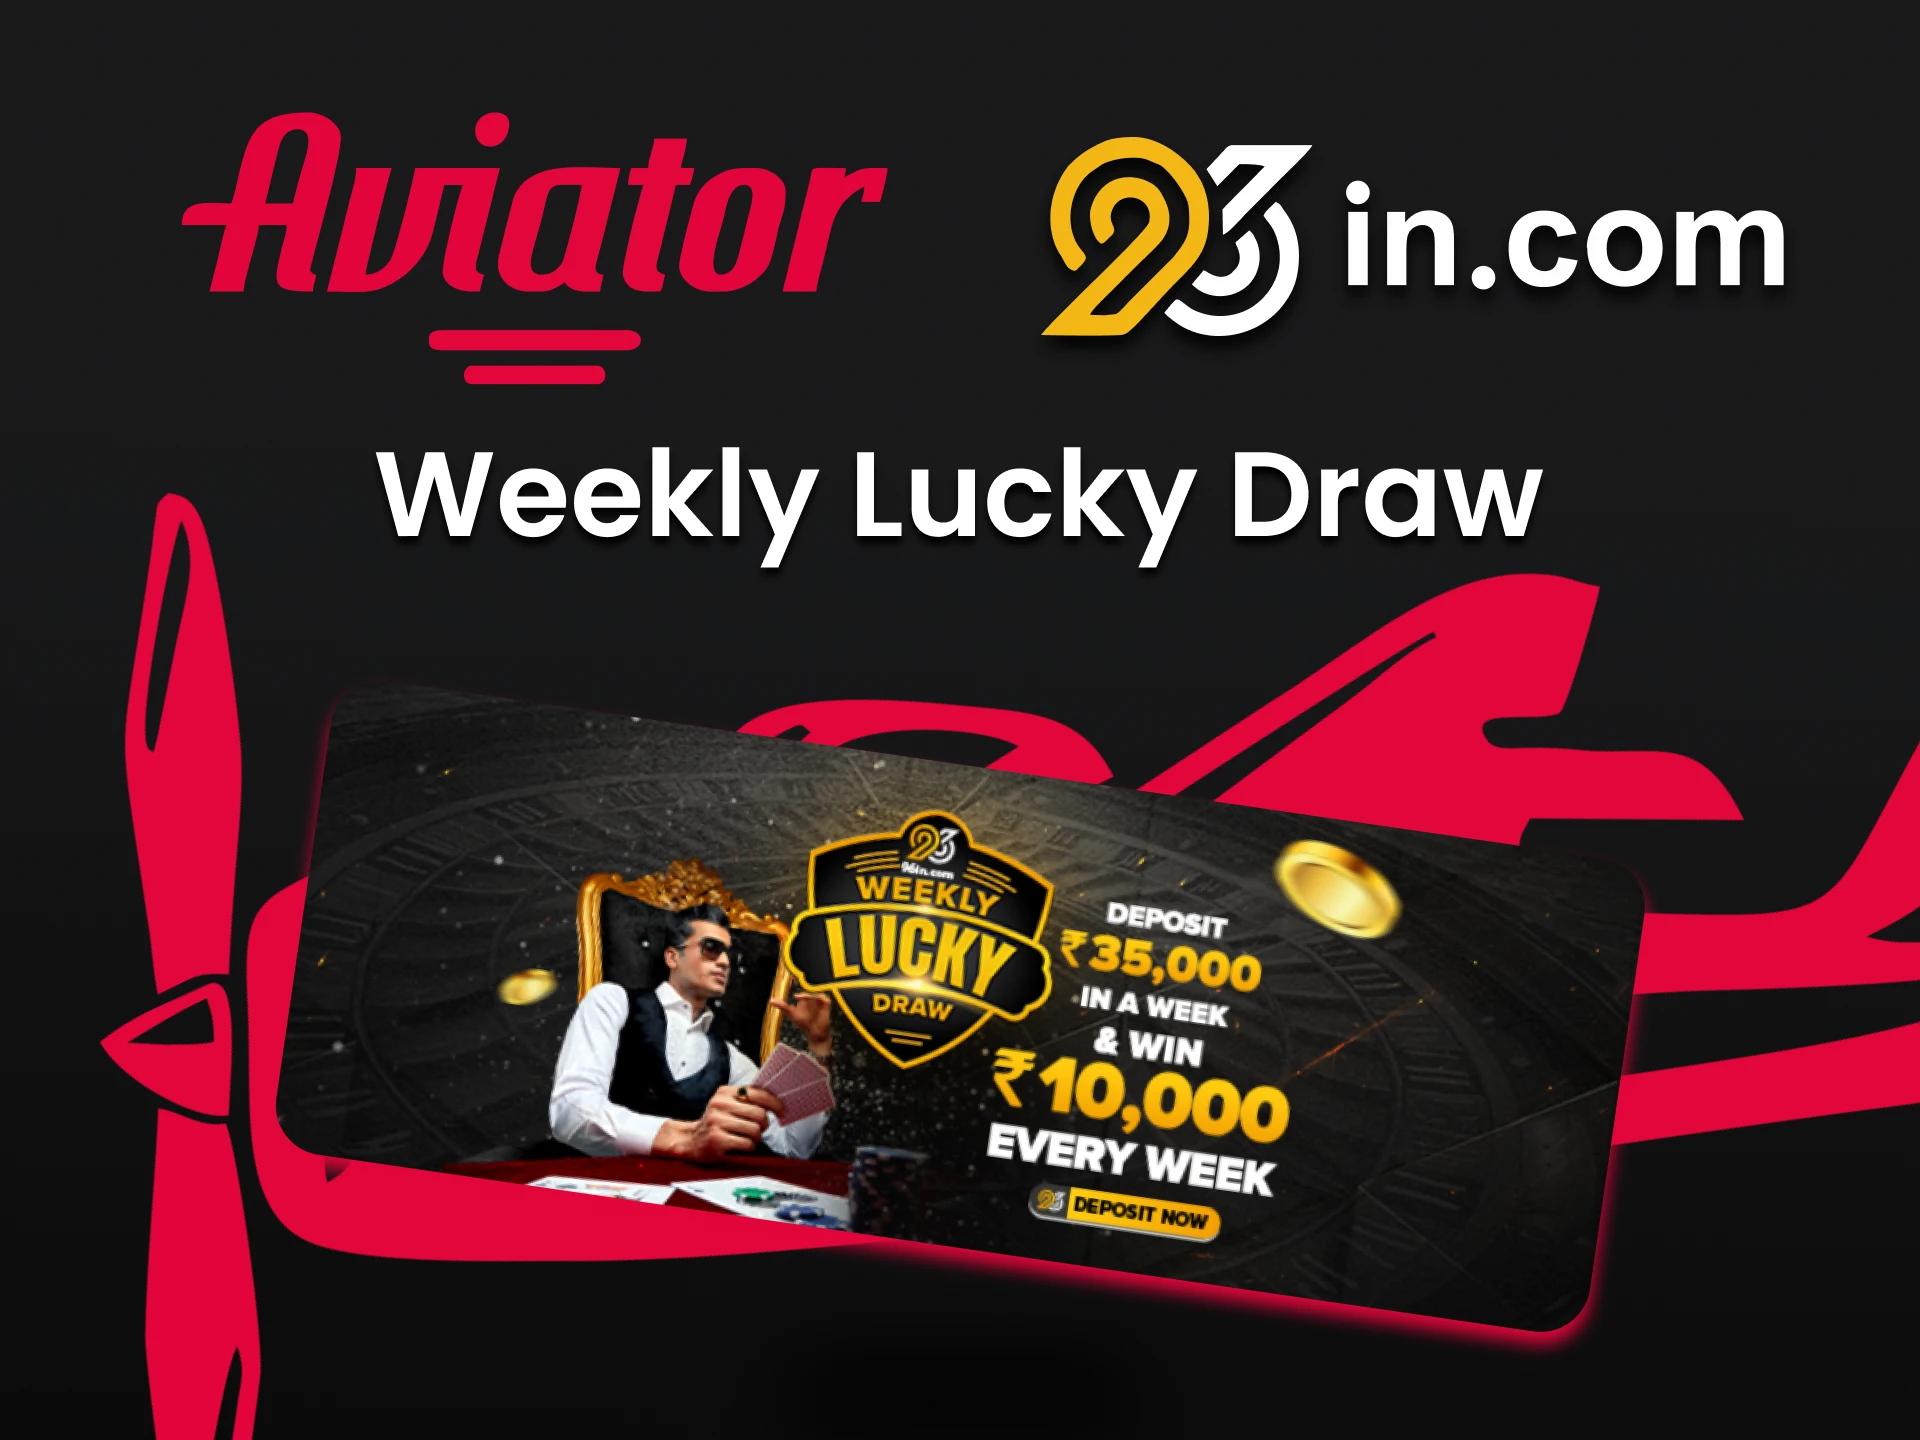 96in is giving away a weekly bonus to play Aviator.